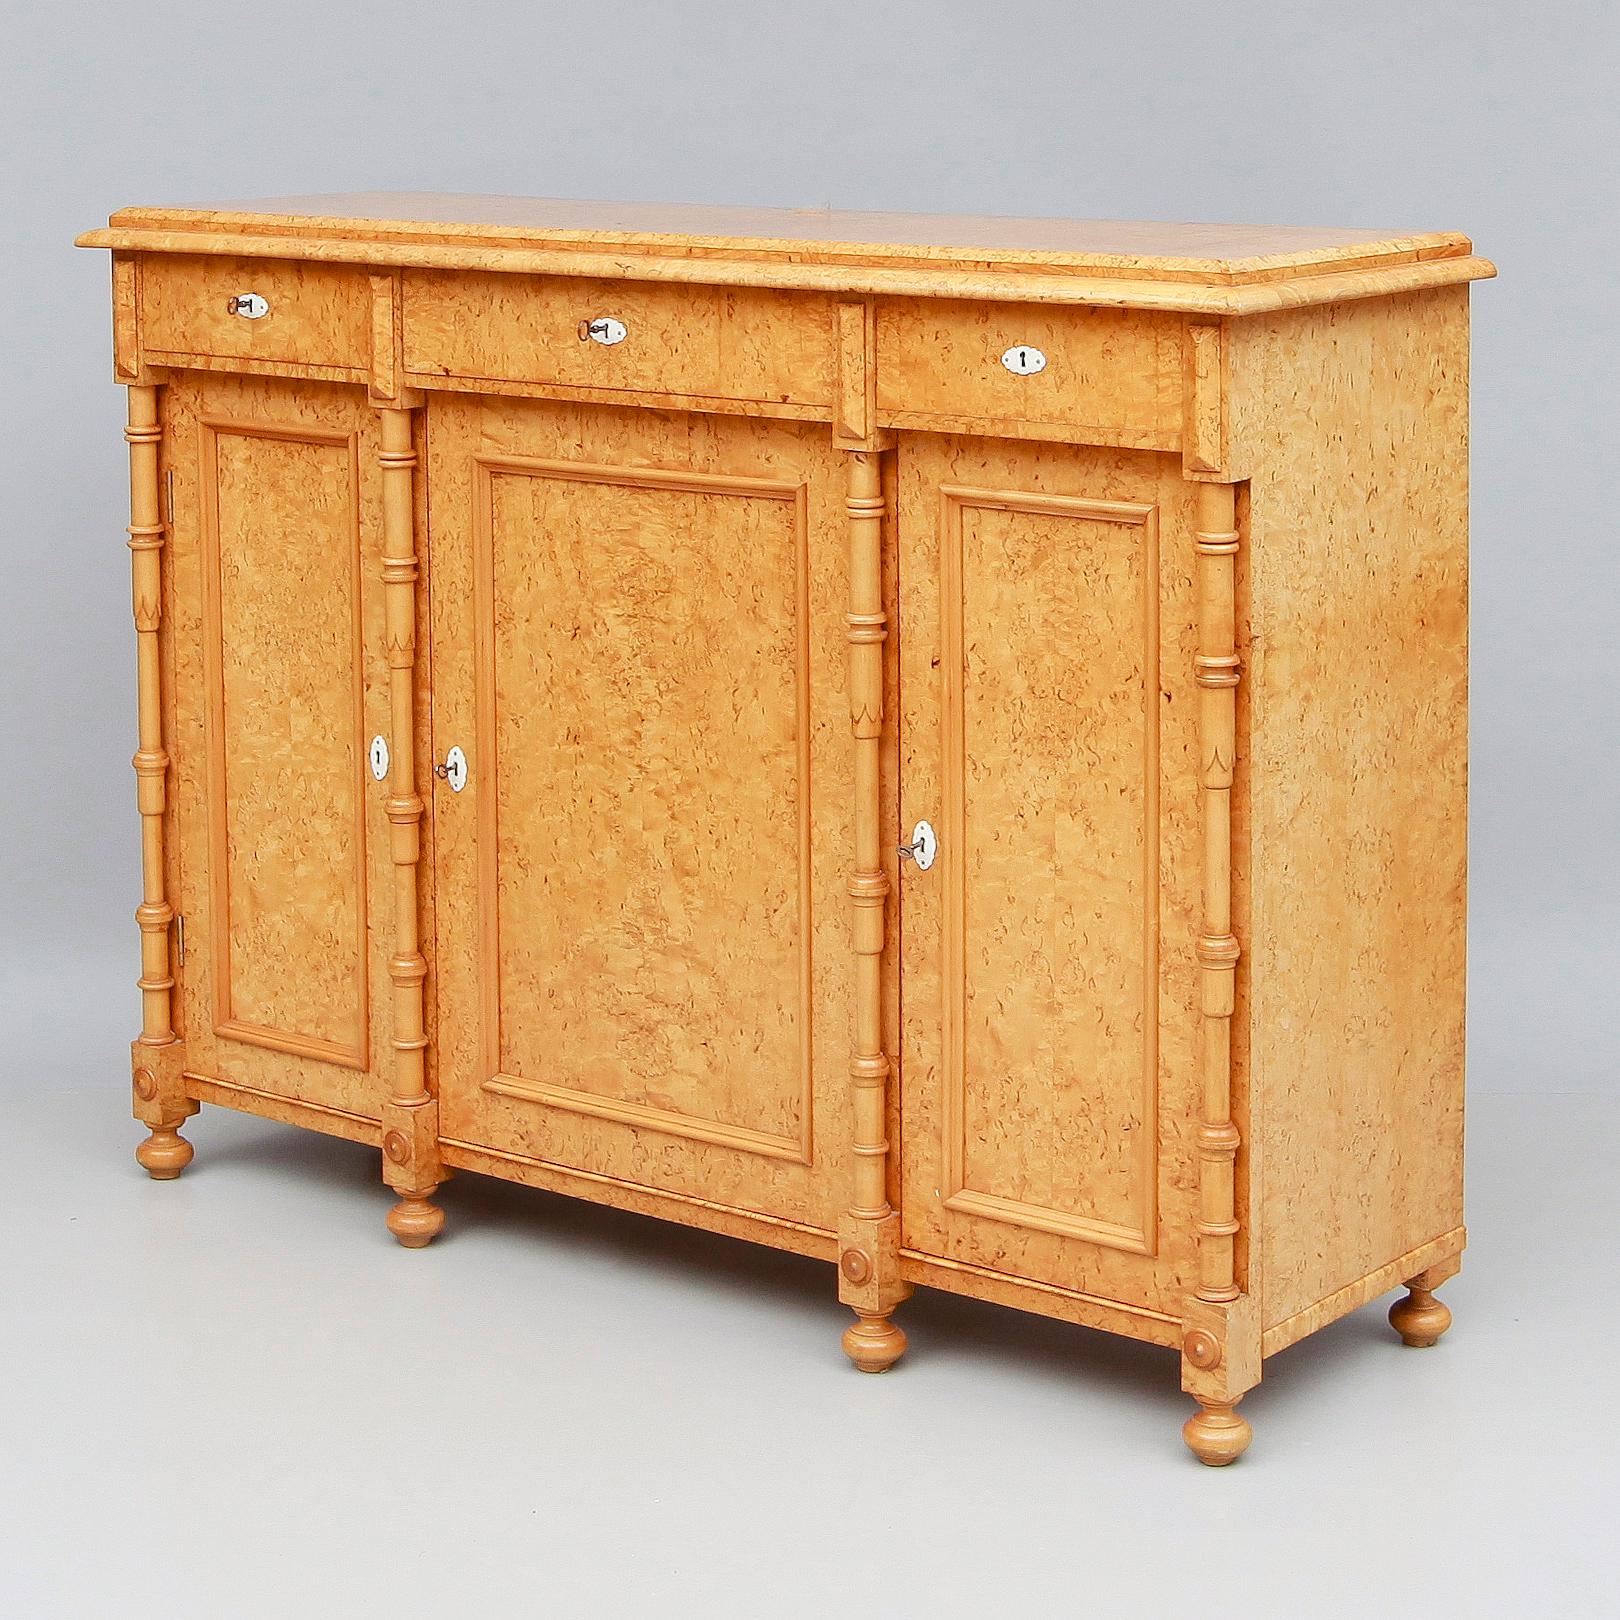 Swedish sideboard or storage cabinet, circa 1880. Completely rendered in highly figured golden birch root (Karelian birch). Key surrounds are original. Columns in solid birchwood. With three drawers and three storage cabinets. Some stains inside of